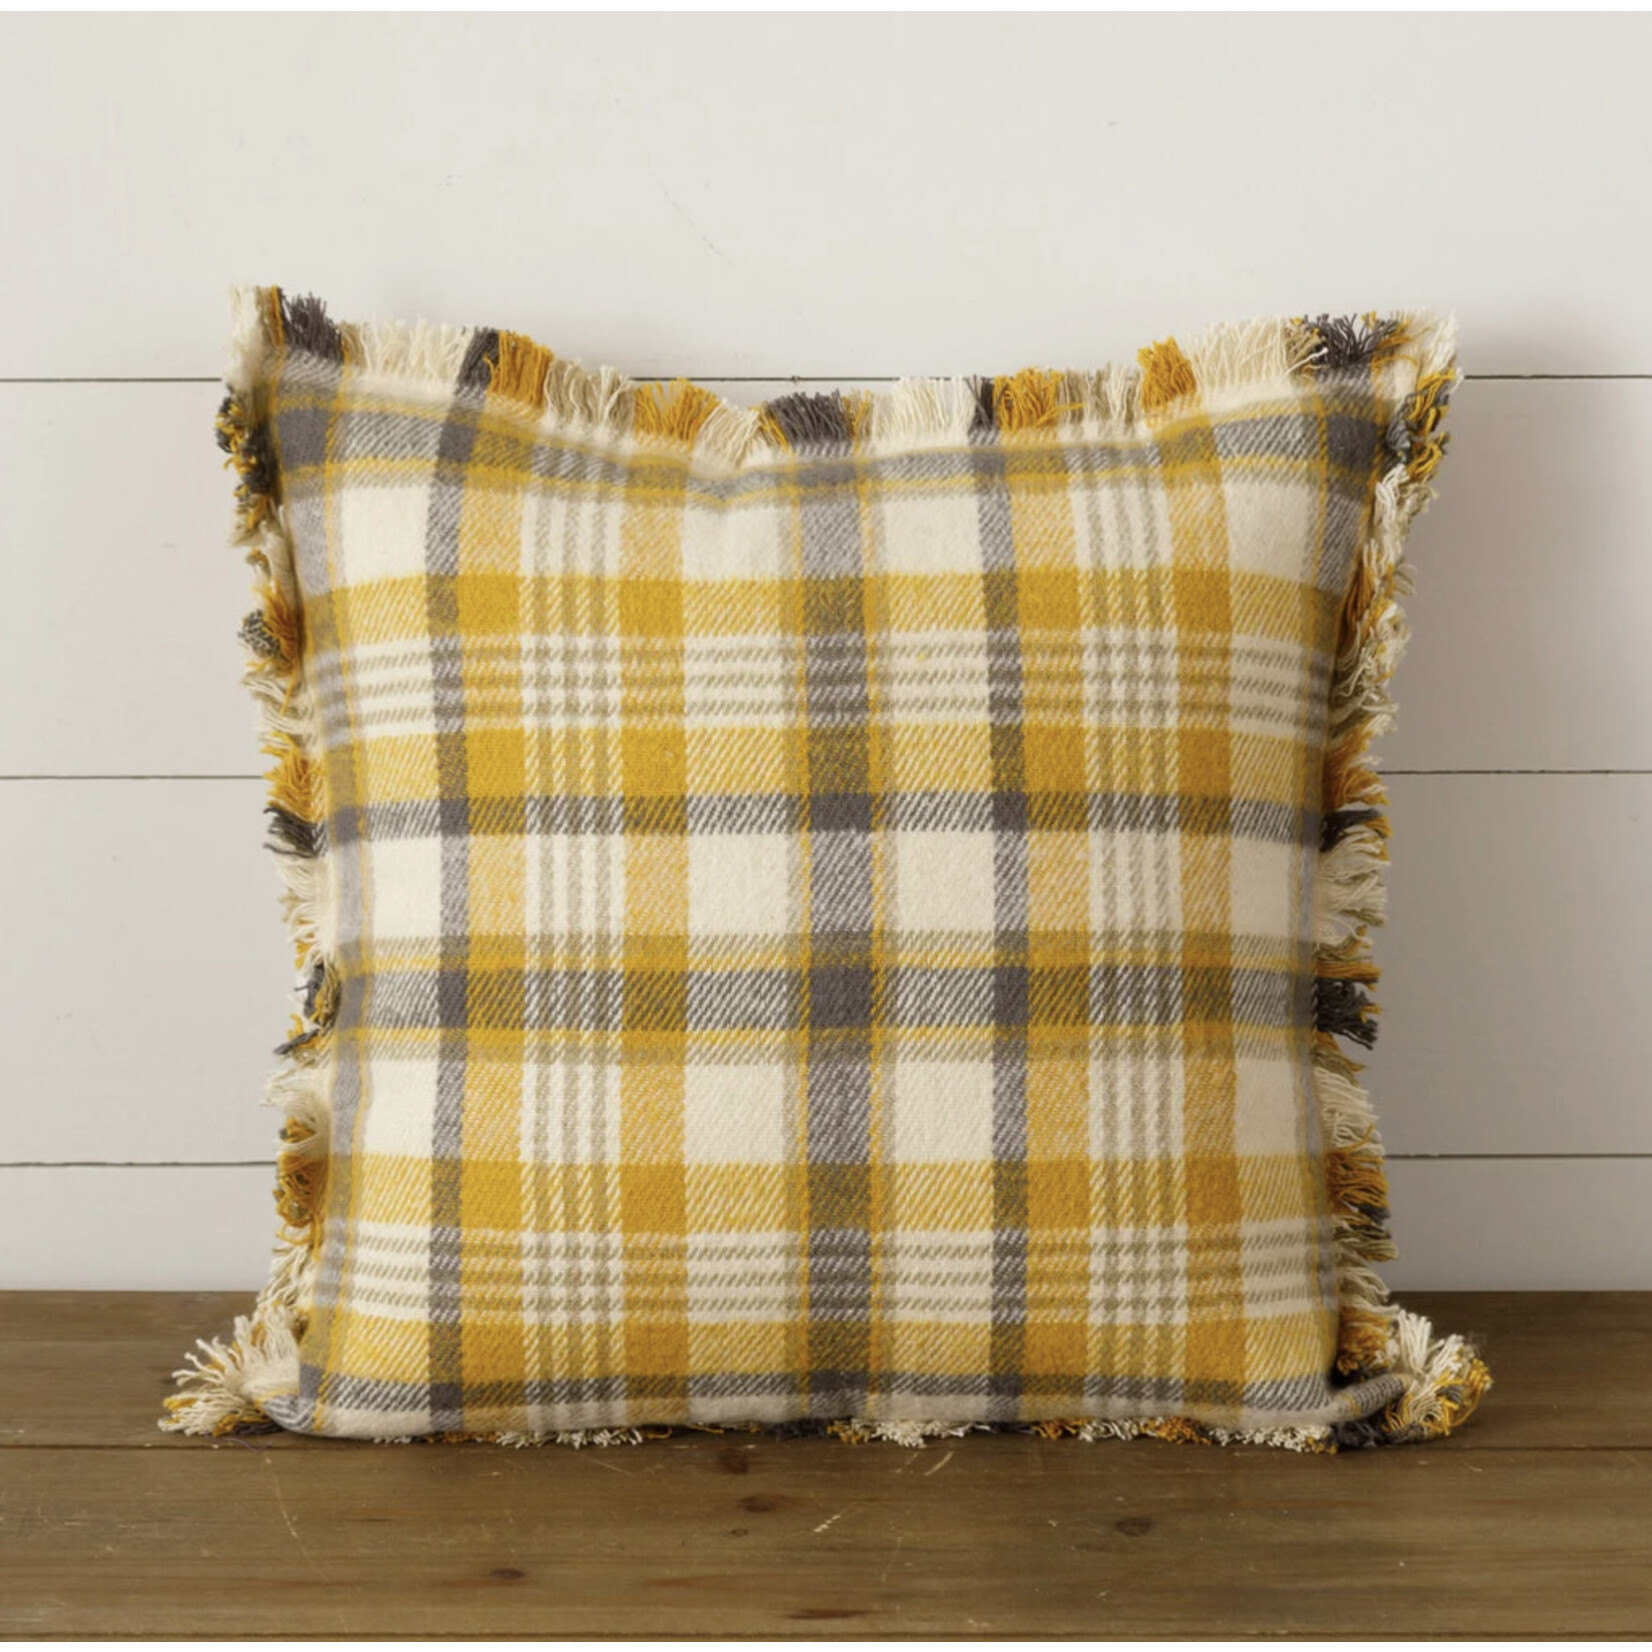 Audrey’s Brushed Cotton Flannel Pillow